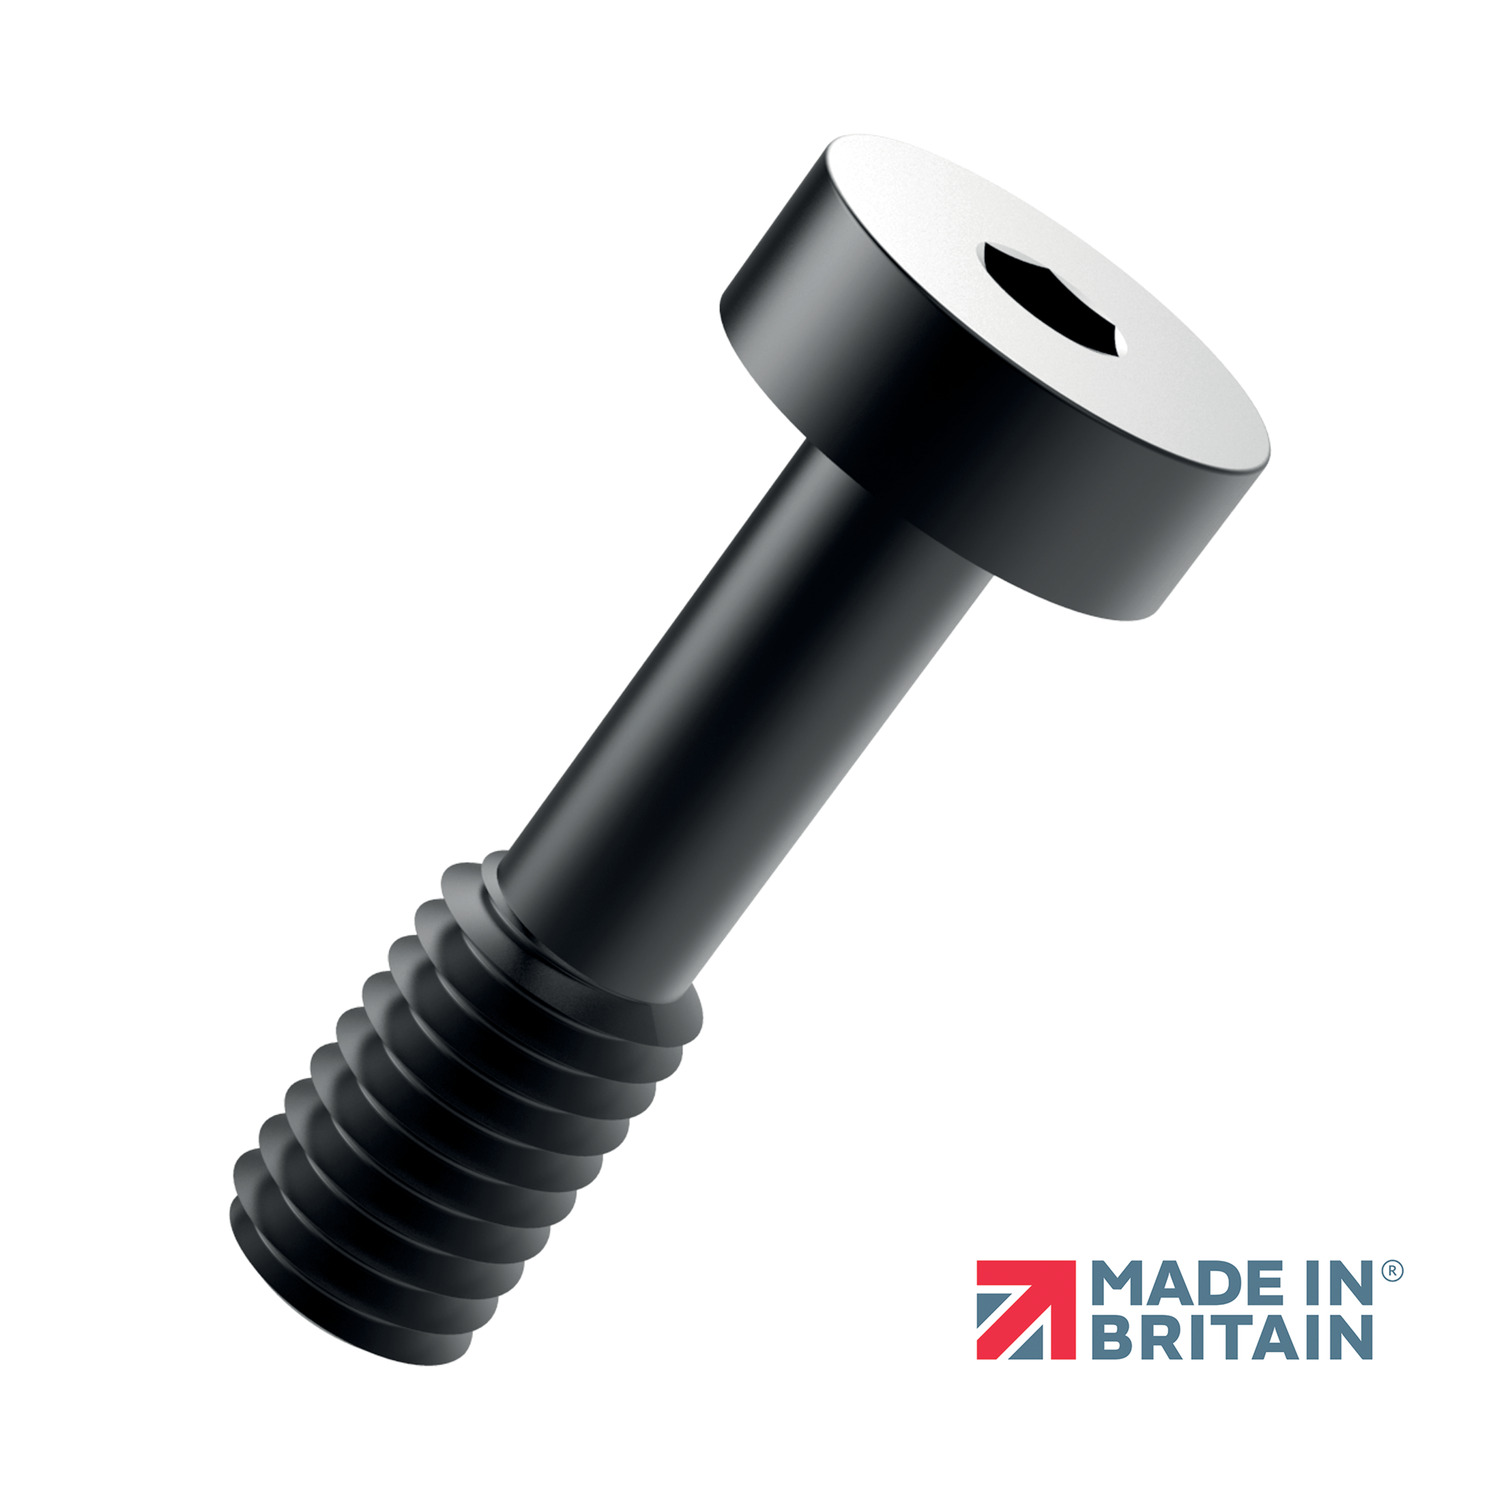 Product P0152.B4, Captive Screws - Cheese Head hex drive - 316 stainless - blackened / 